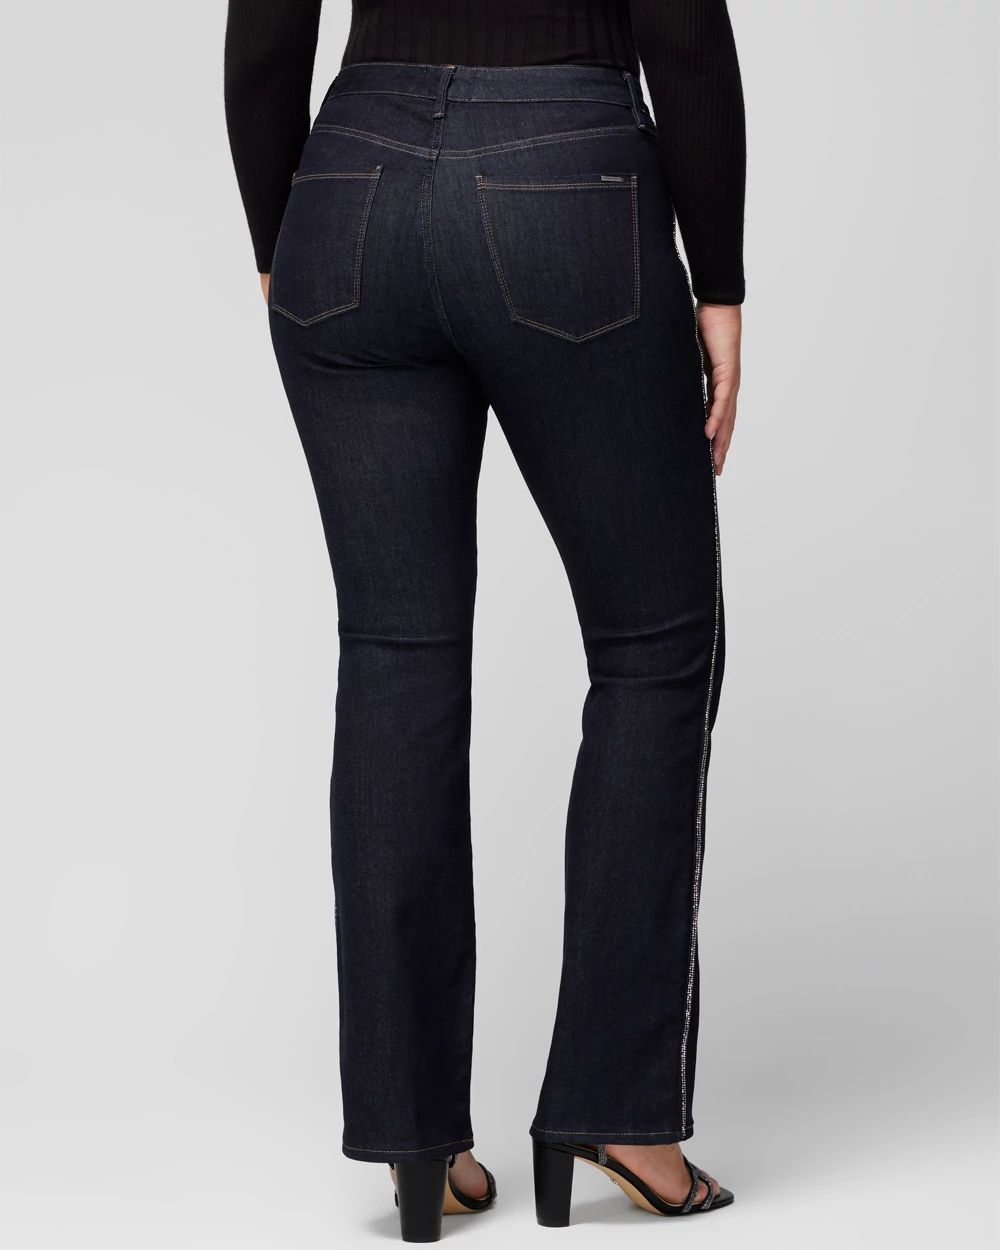 Curvy High Rise Sculpt Embellished Flare Jeans click to view larger image.